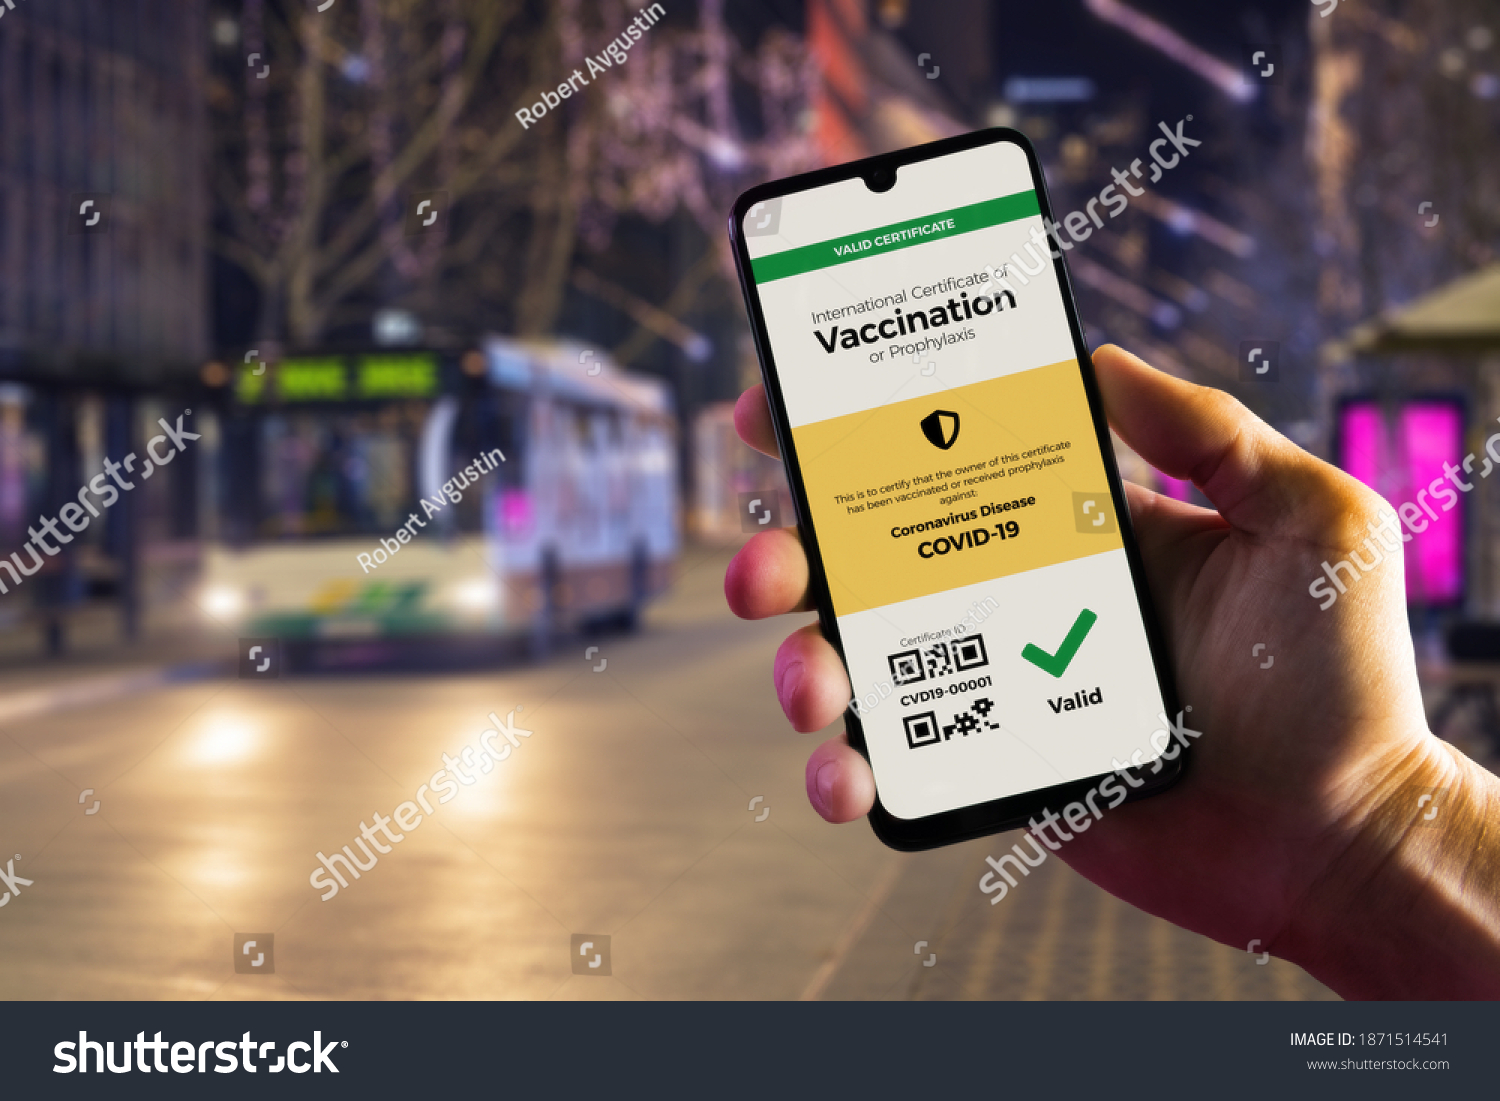 Smartphone displaying a valid digital vaccination certificate for COVID-19 in male's hand, downtown and city bus in background. Vaccination, disease immunity passport, health and surveillance concepts #1871514541